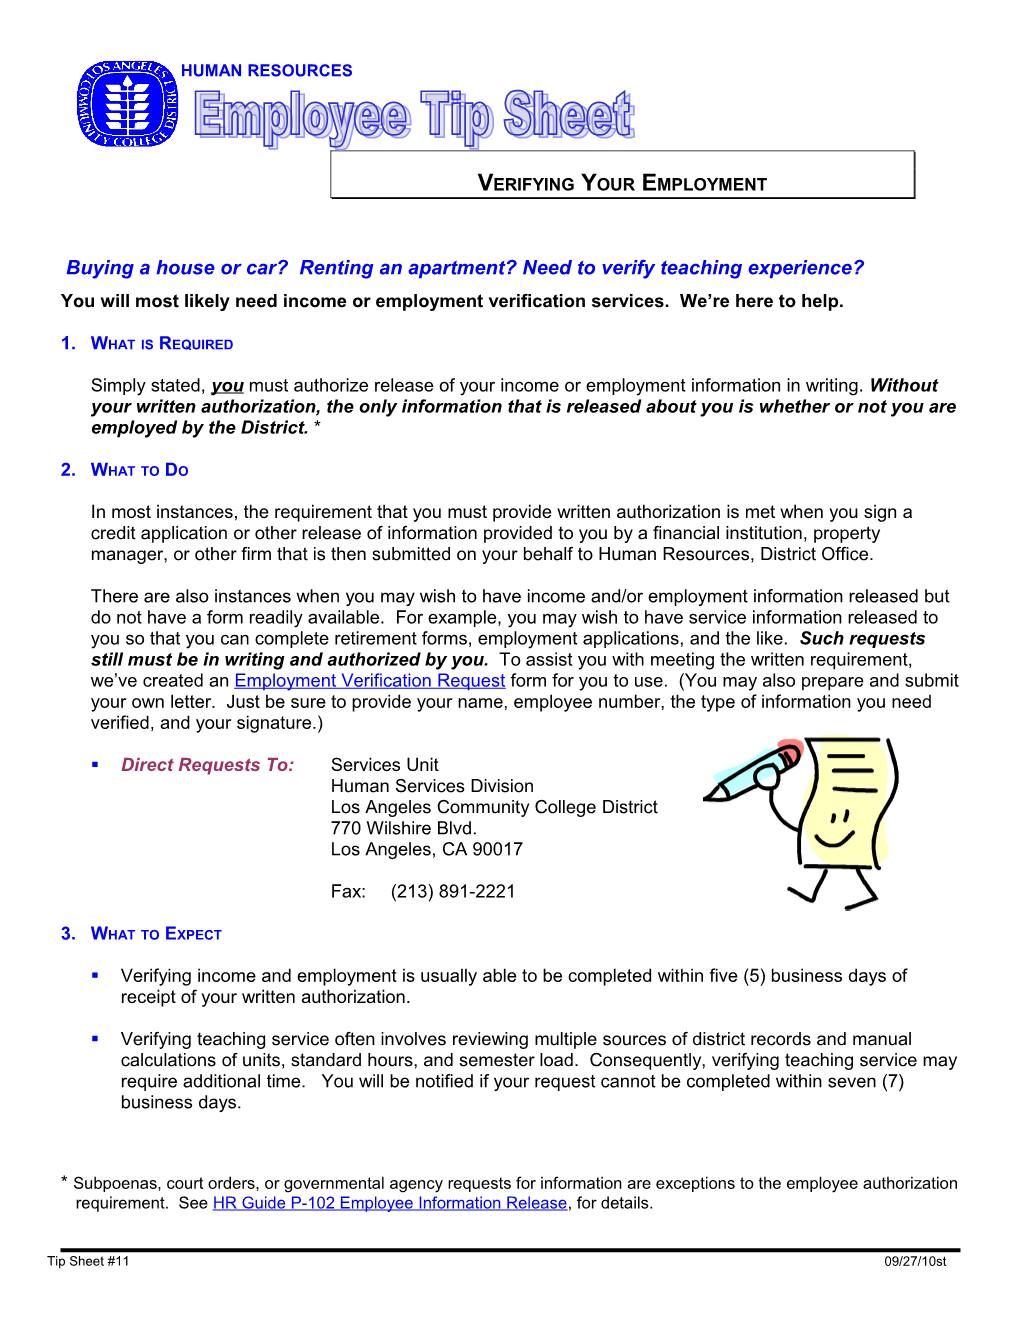 Verifying Your Employment